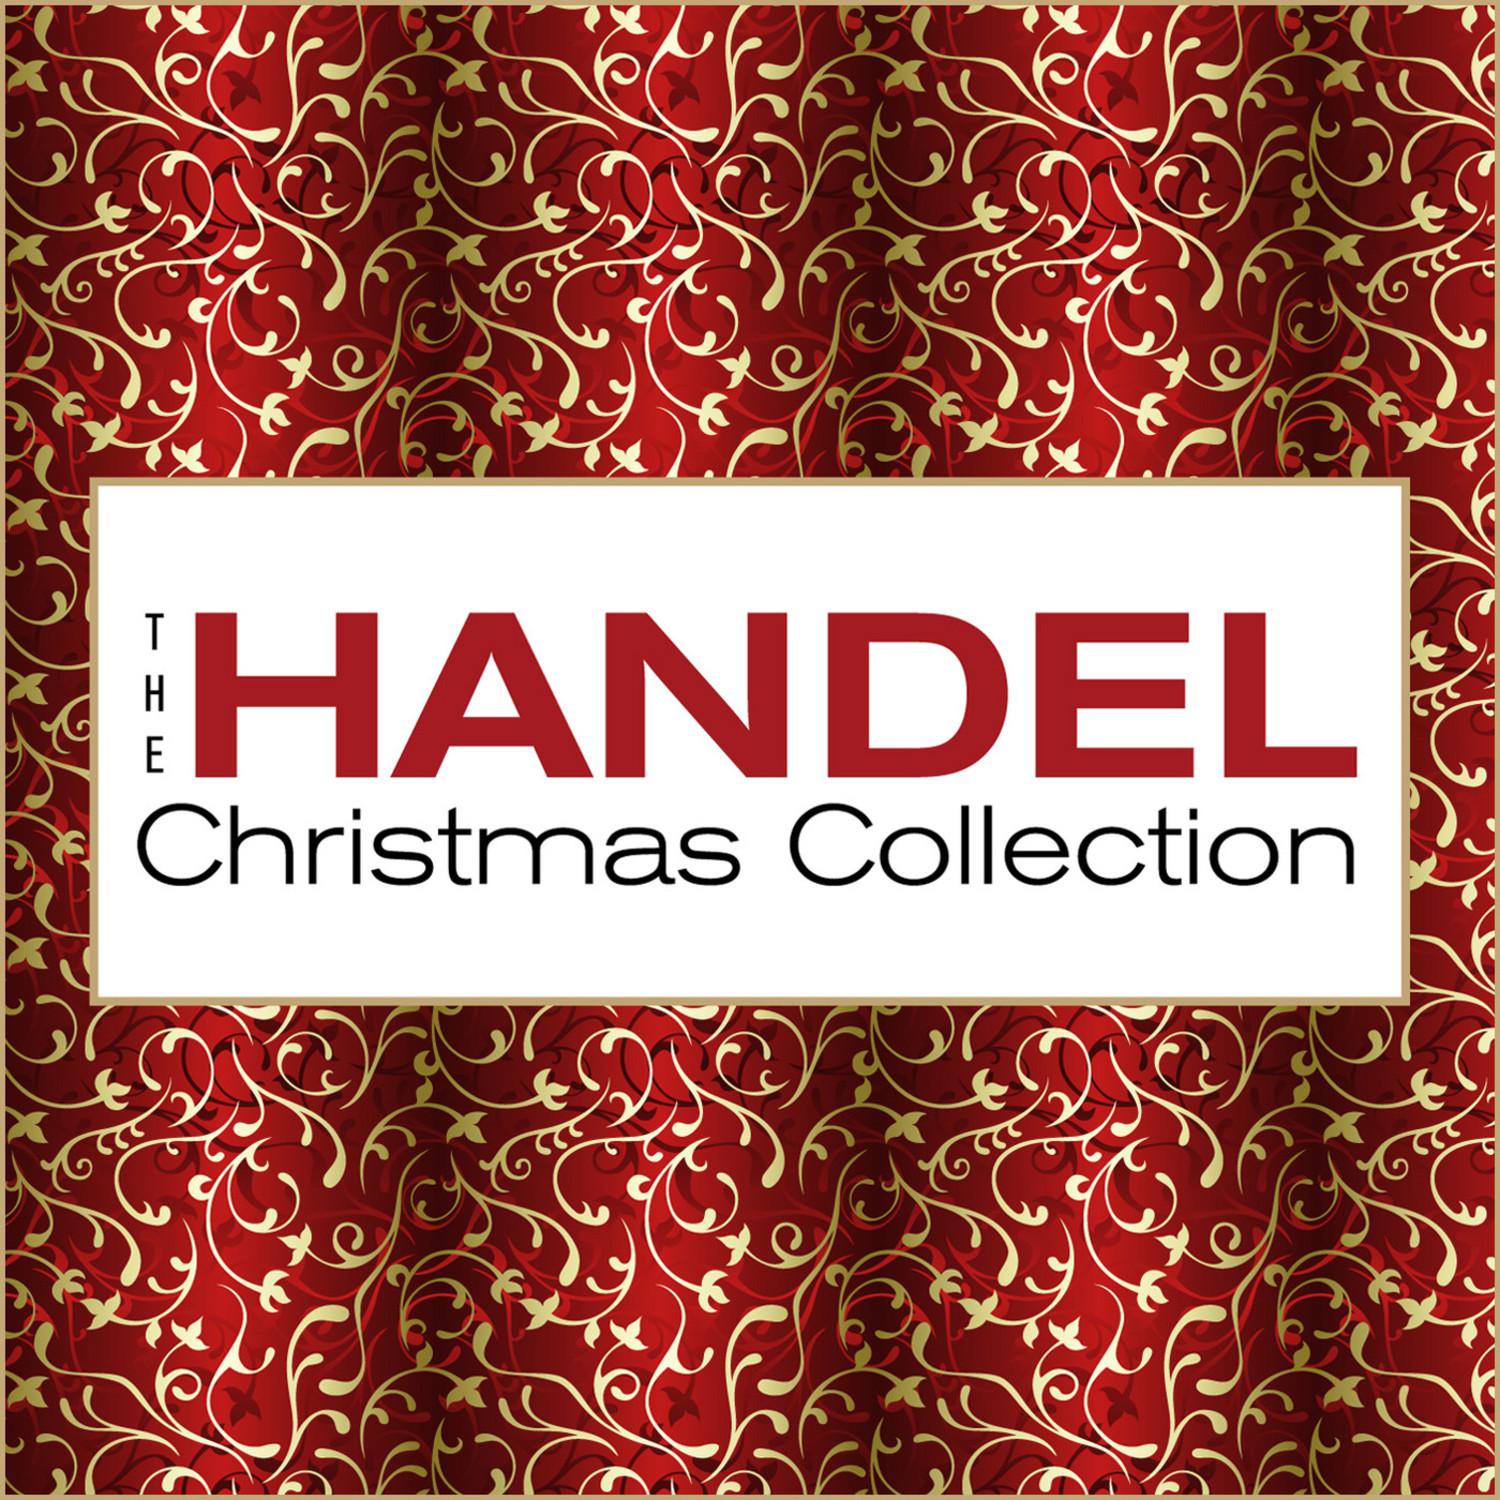 The Handel Christmas Collection